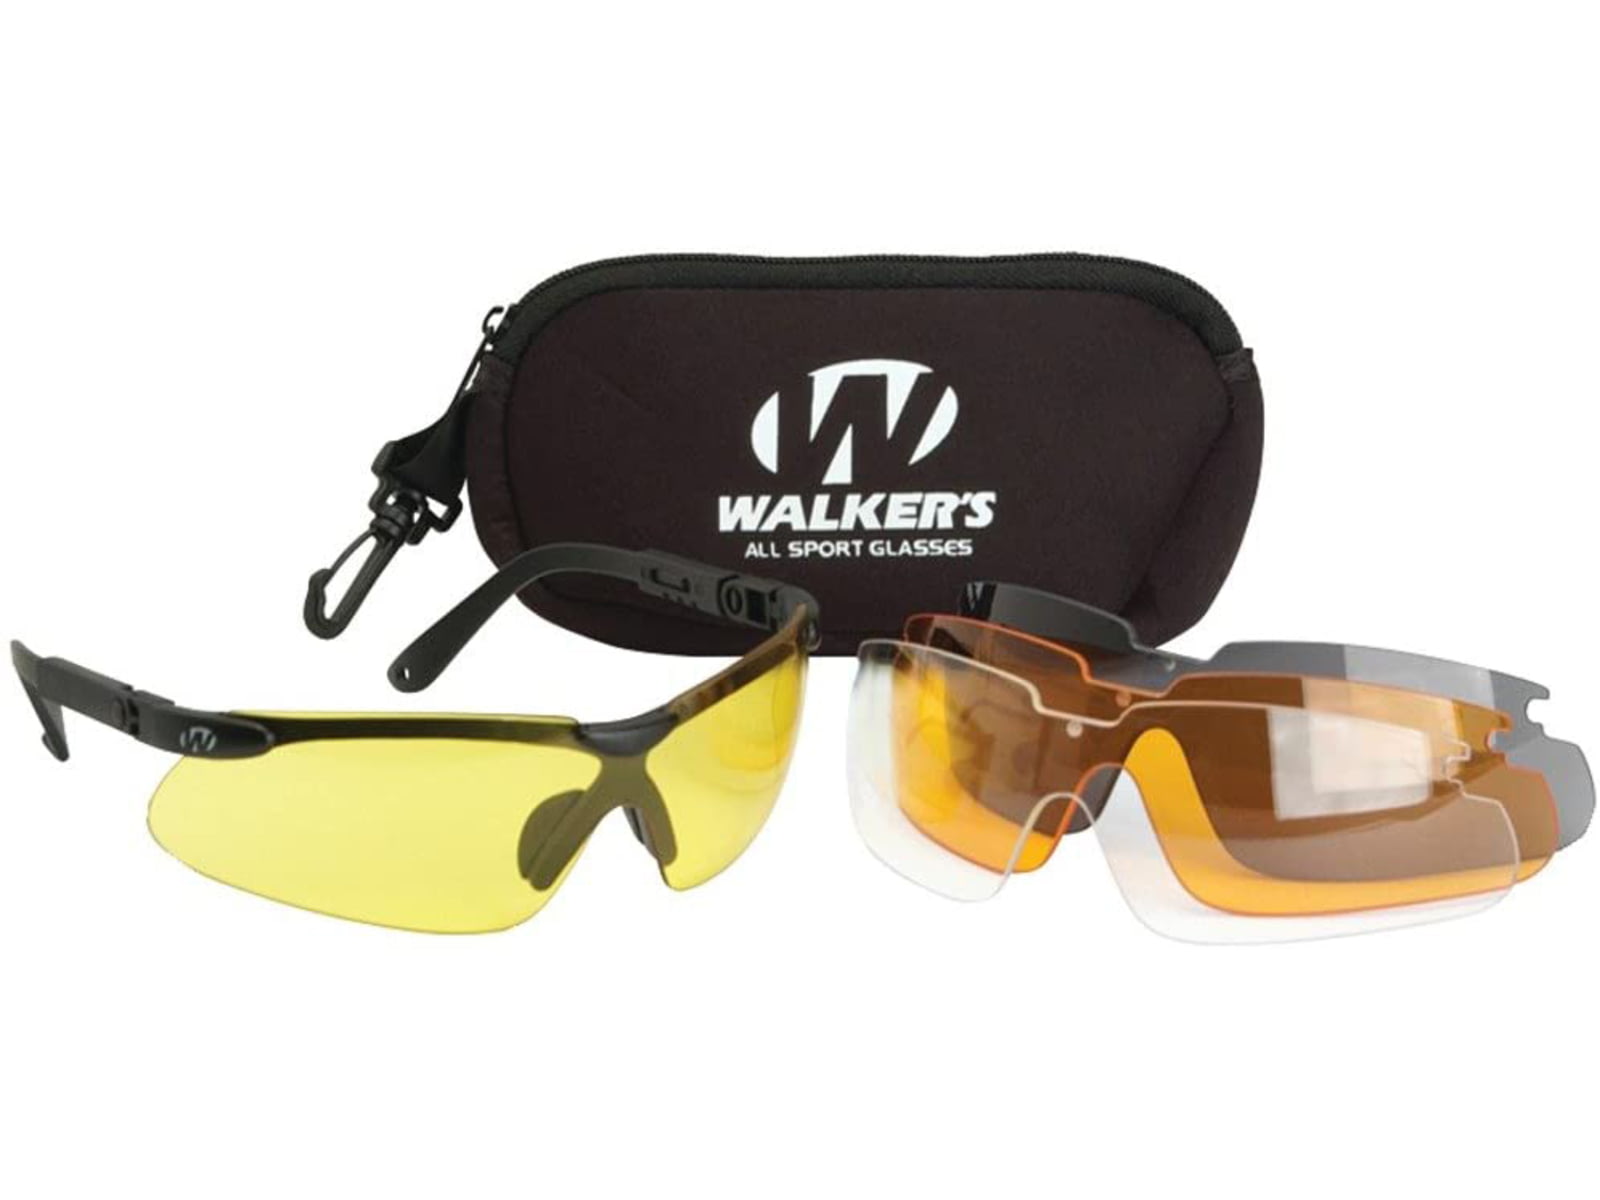 Walkers GWPASG4L2 Sport Glasses Interchangeable Lens Black Polymer Frame Polycarbonate Lenses Clear/Yellow/Amber/Brown - image 2 of 2